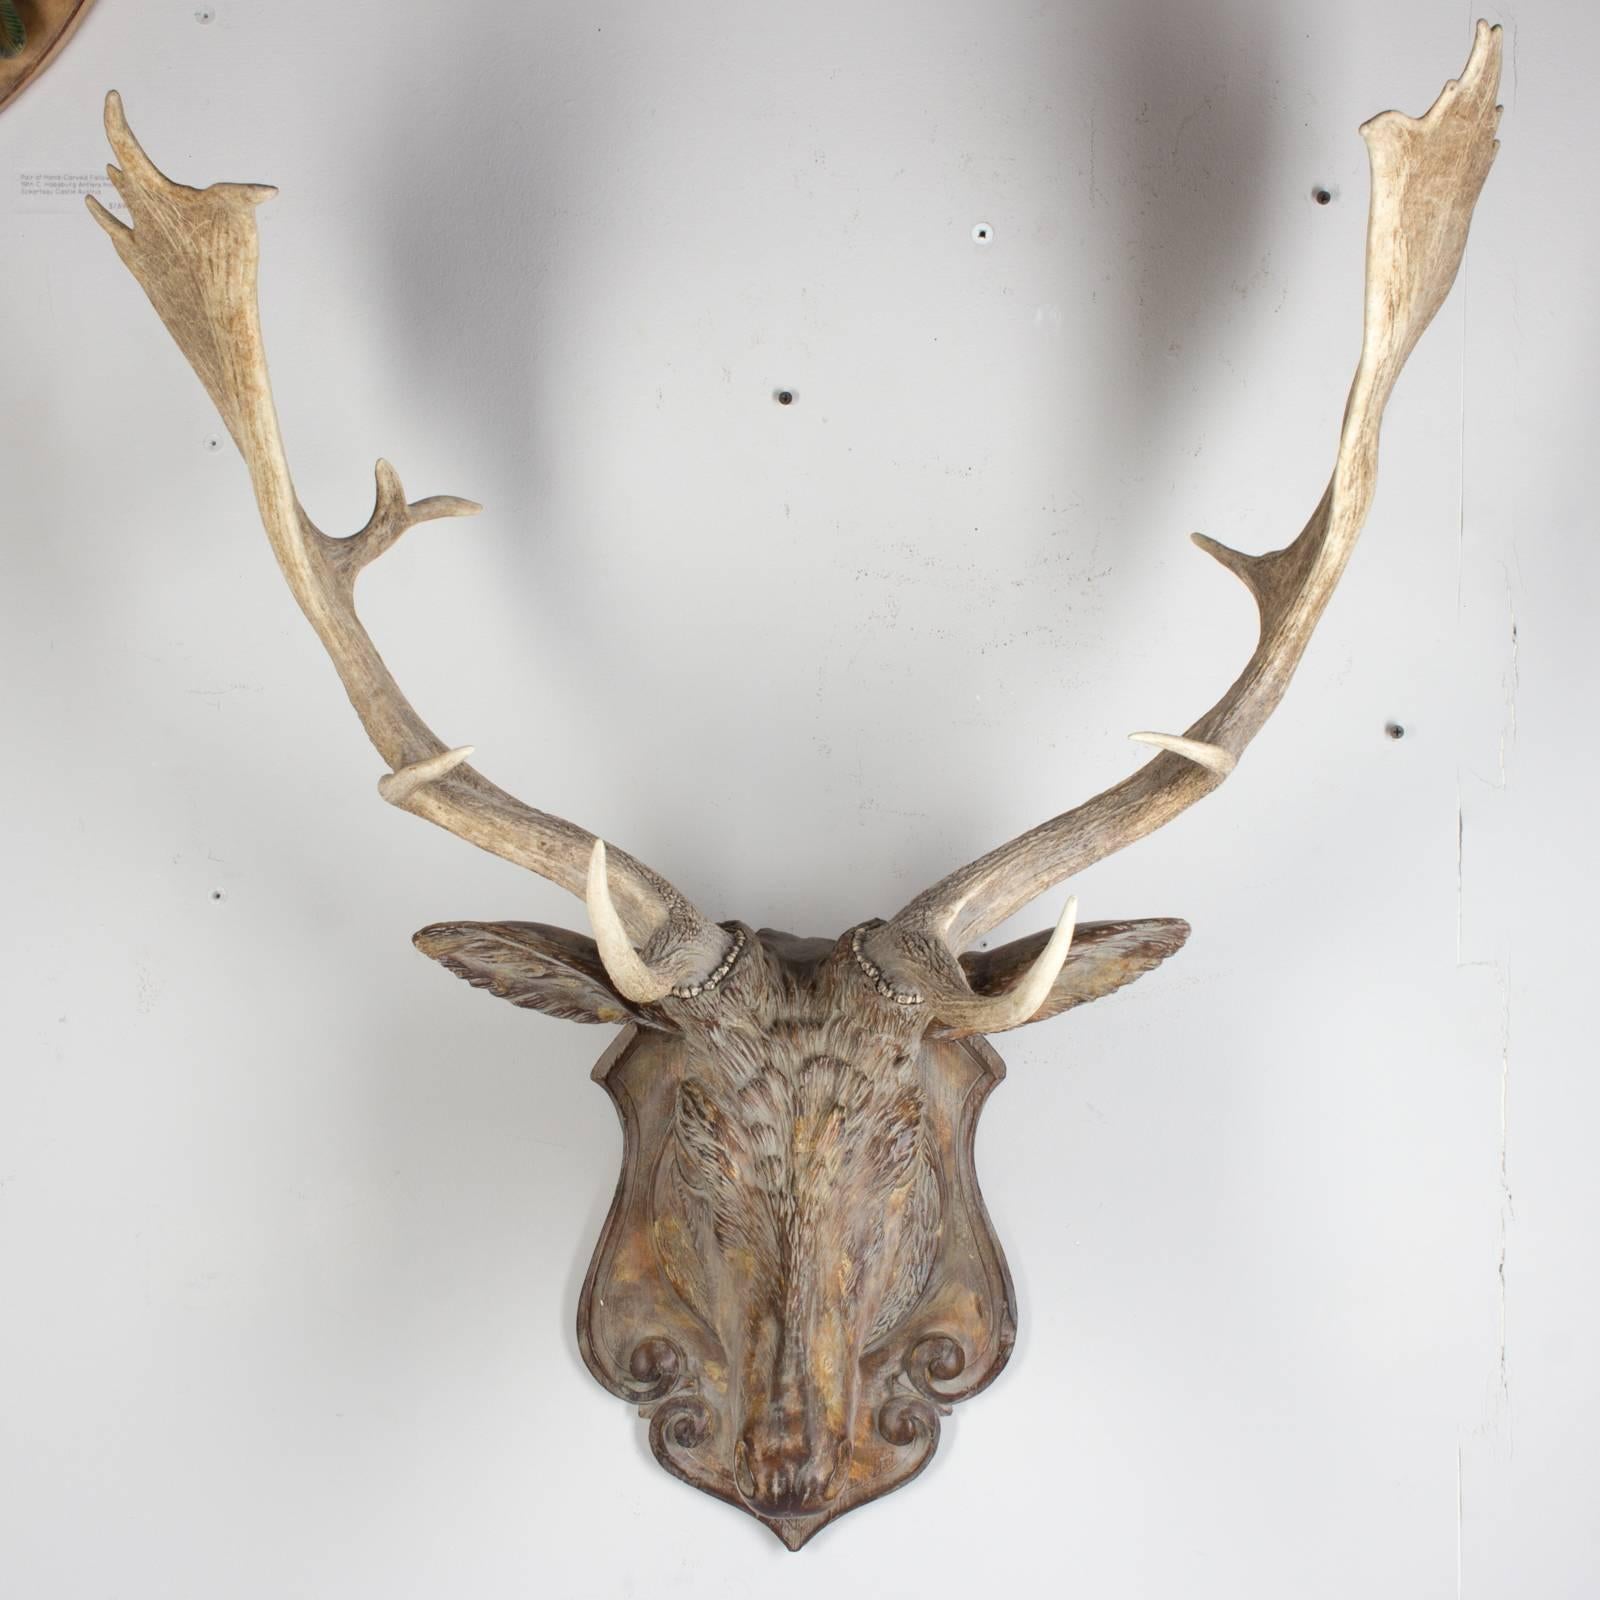 An exquisite fallow deer hunting trophy crafted of terracotta faux bois with 19th century Habsburg antlers from Emperor Franz Josef's castle at Eckartsau in the Southern Austrian Alps, a favorite hunting schloss of the Habsburg royal family. The